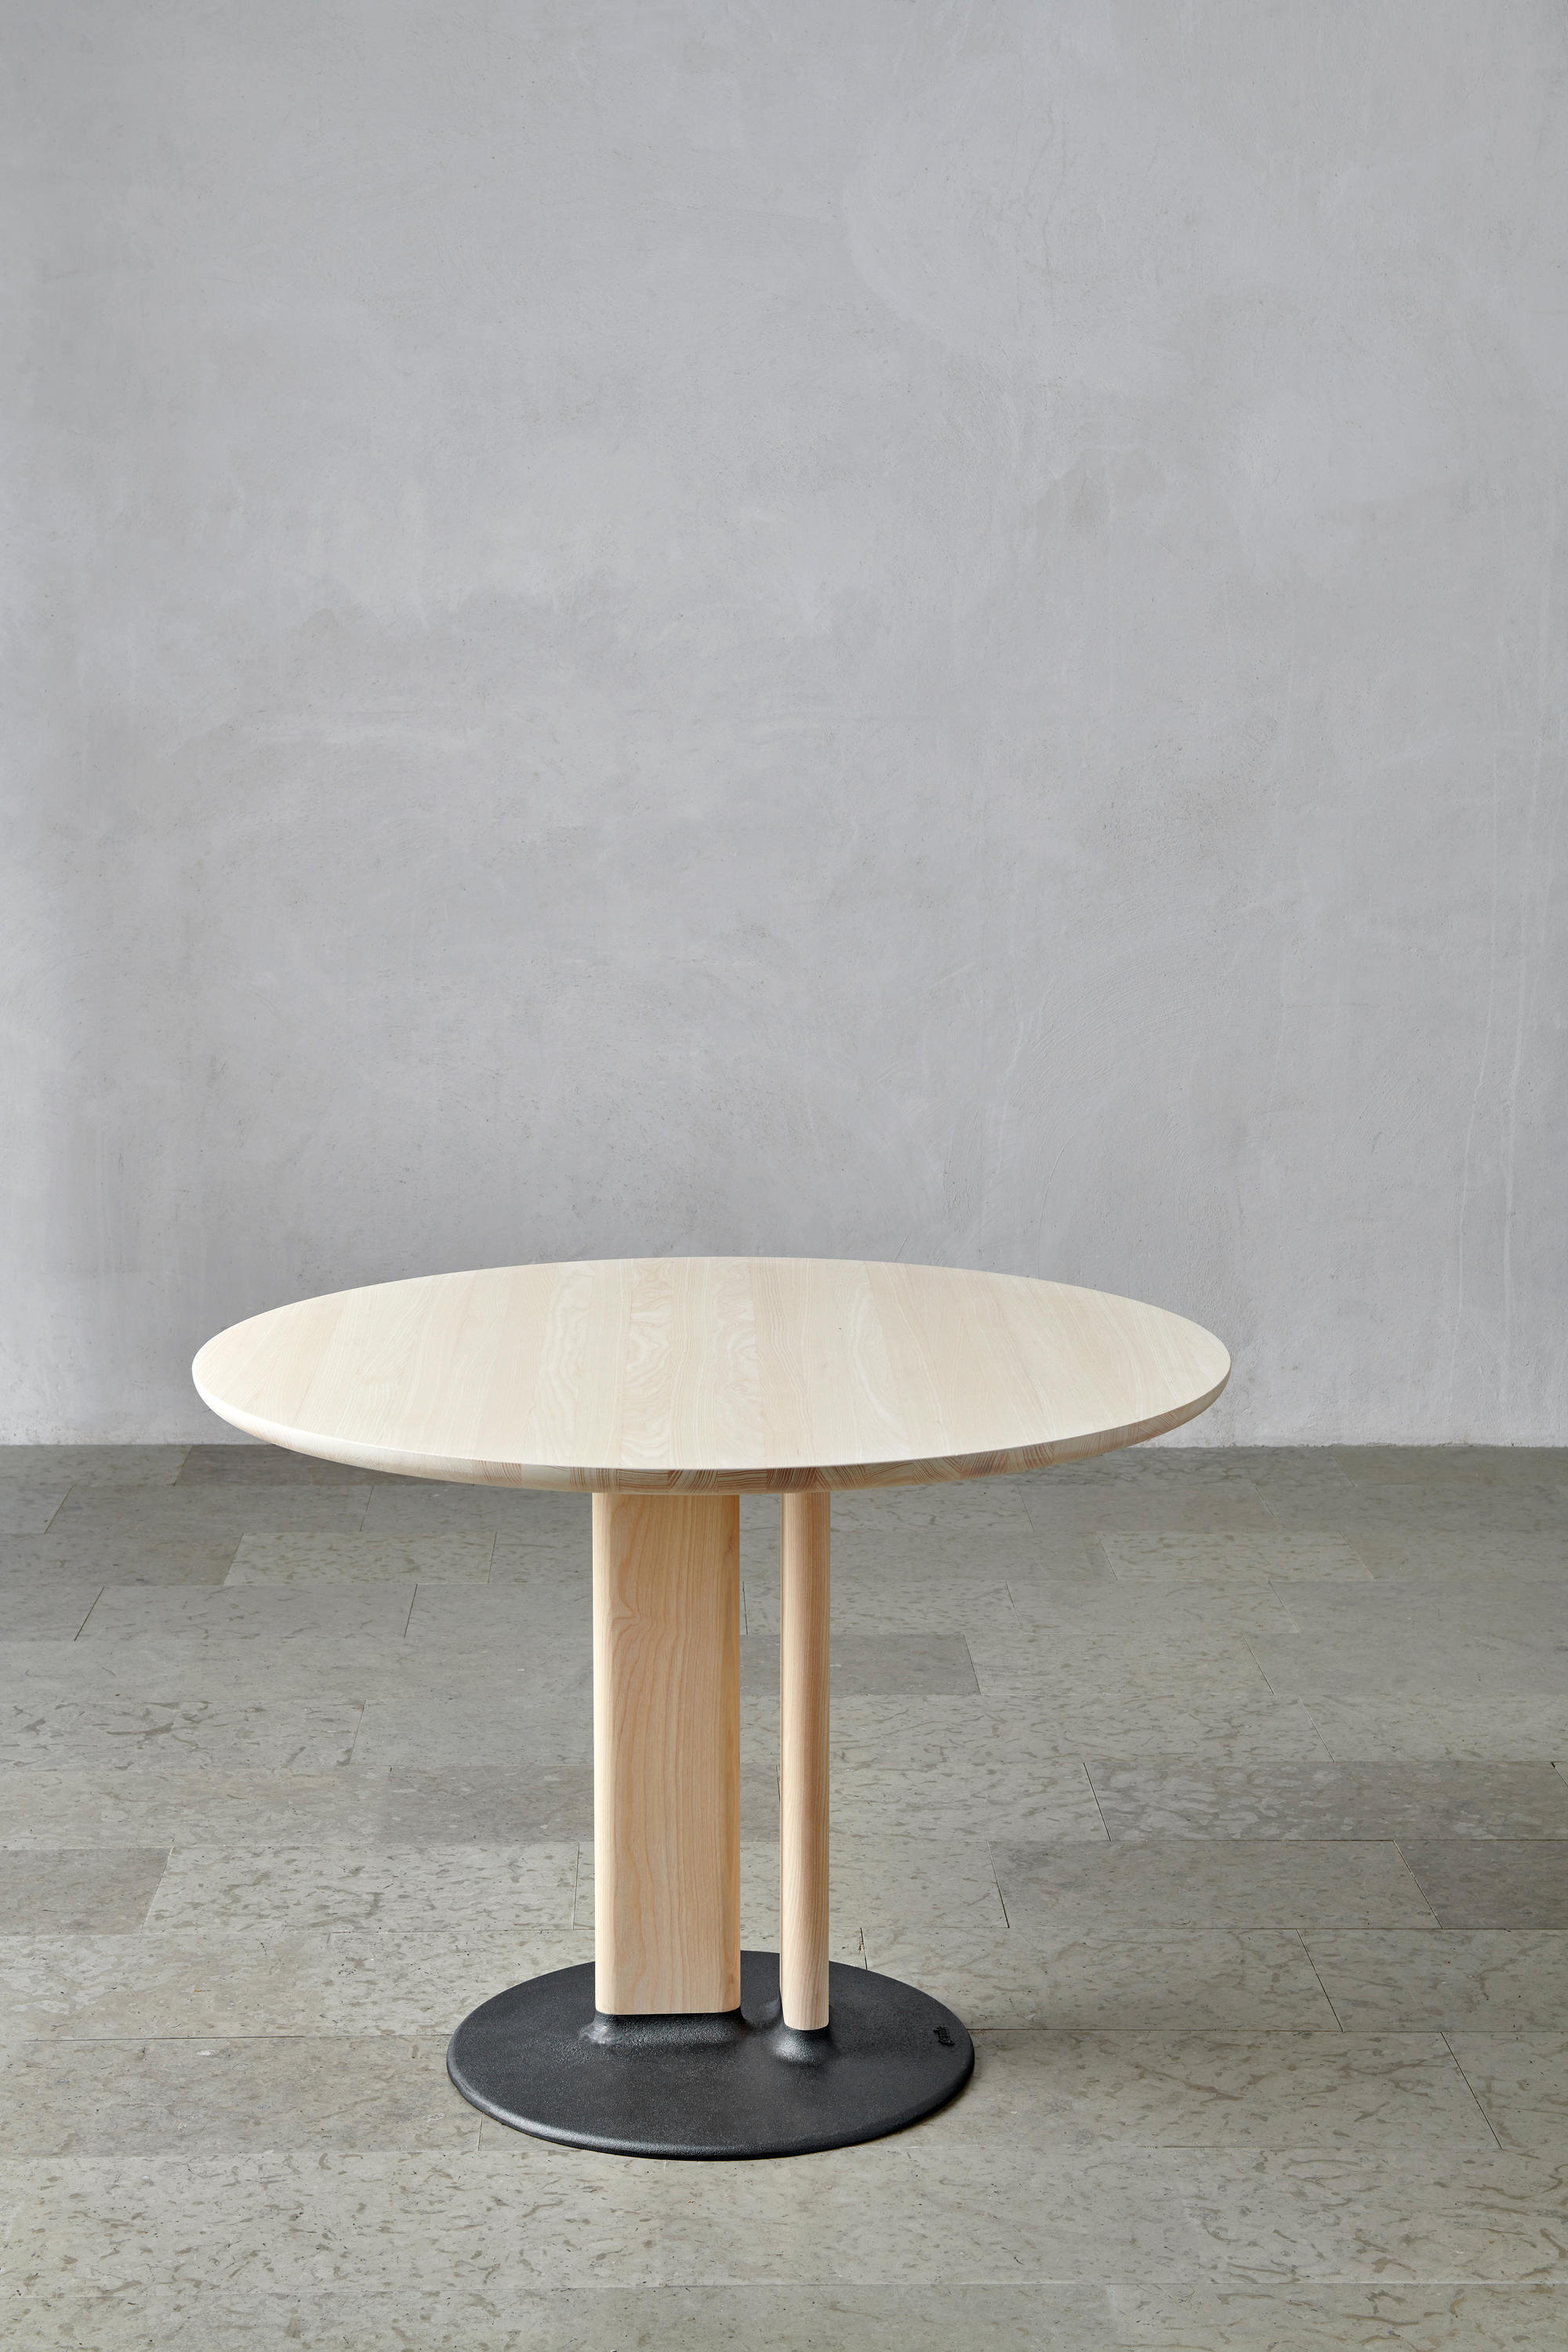 STAM Table 90x90